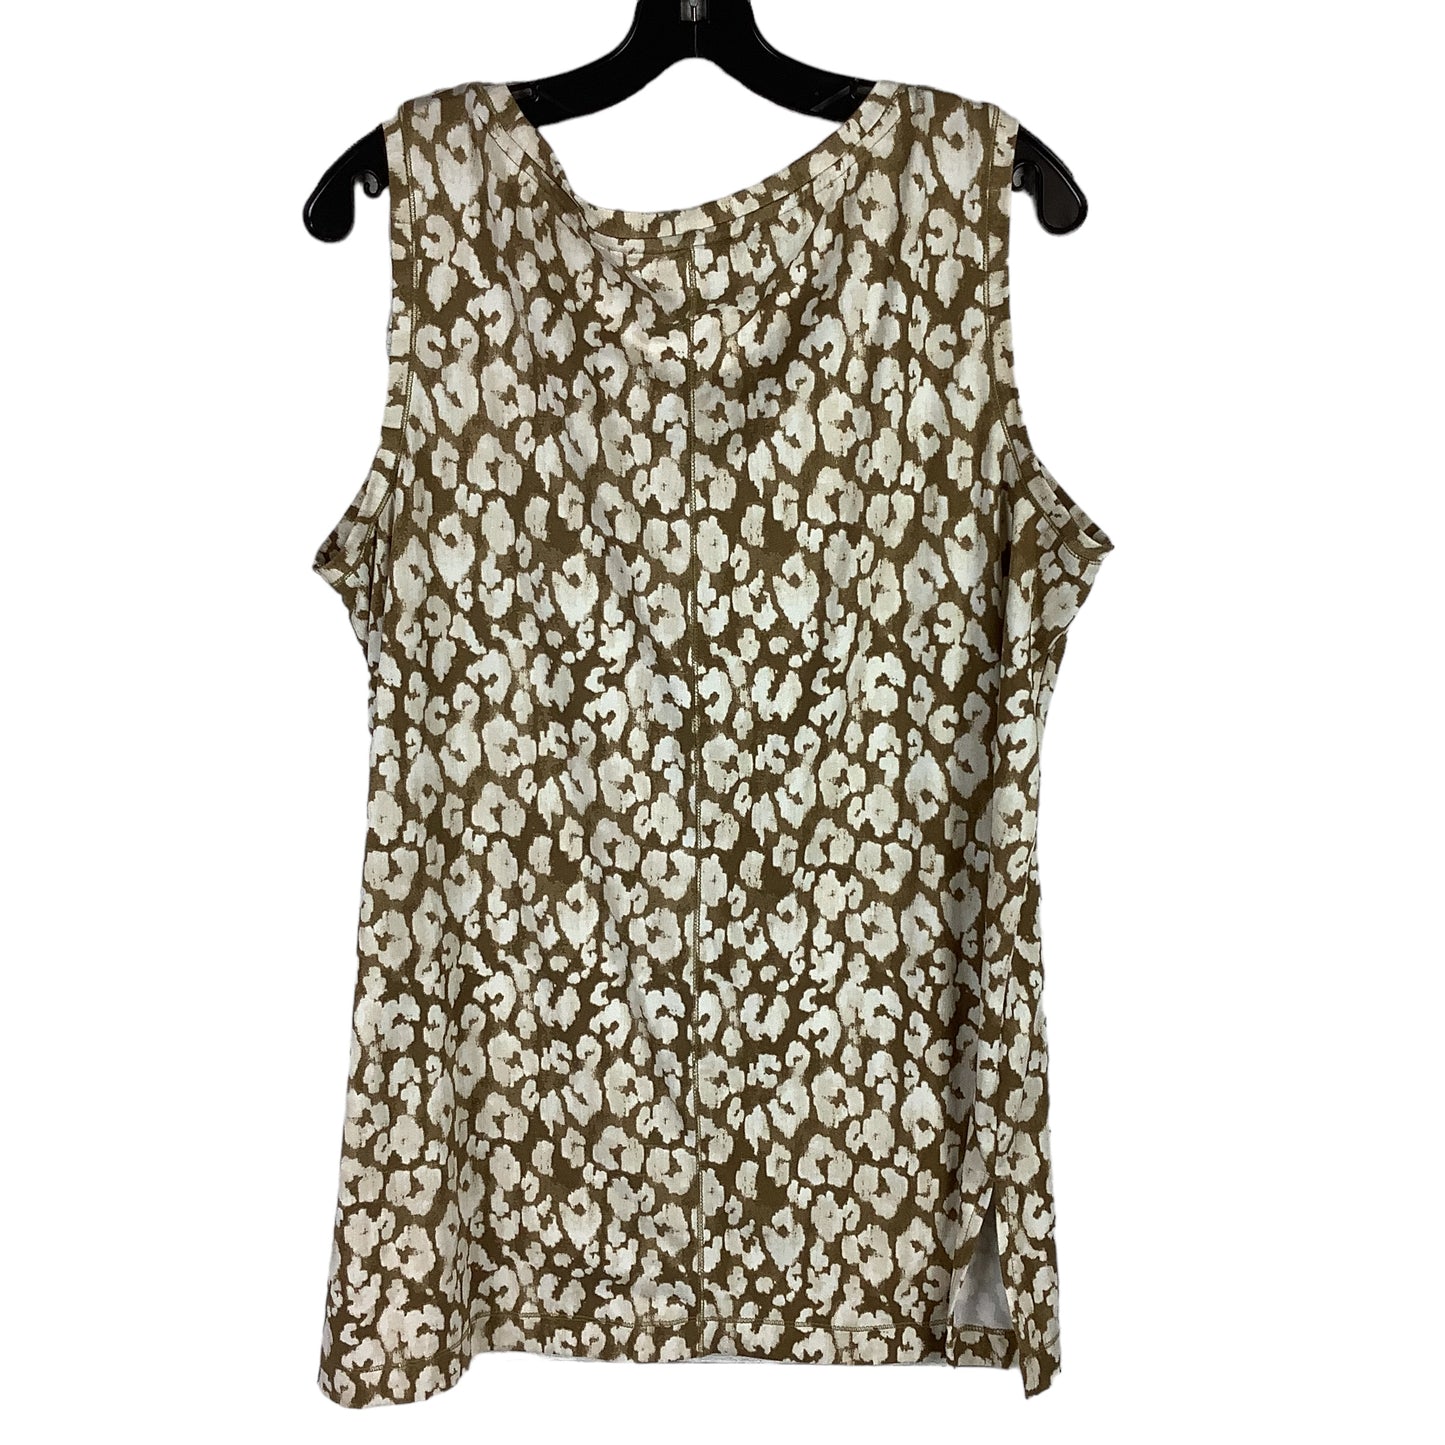 Athletic Tank Top By Wondery  Size: Xl